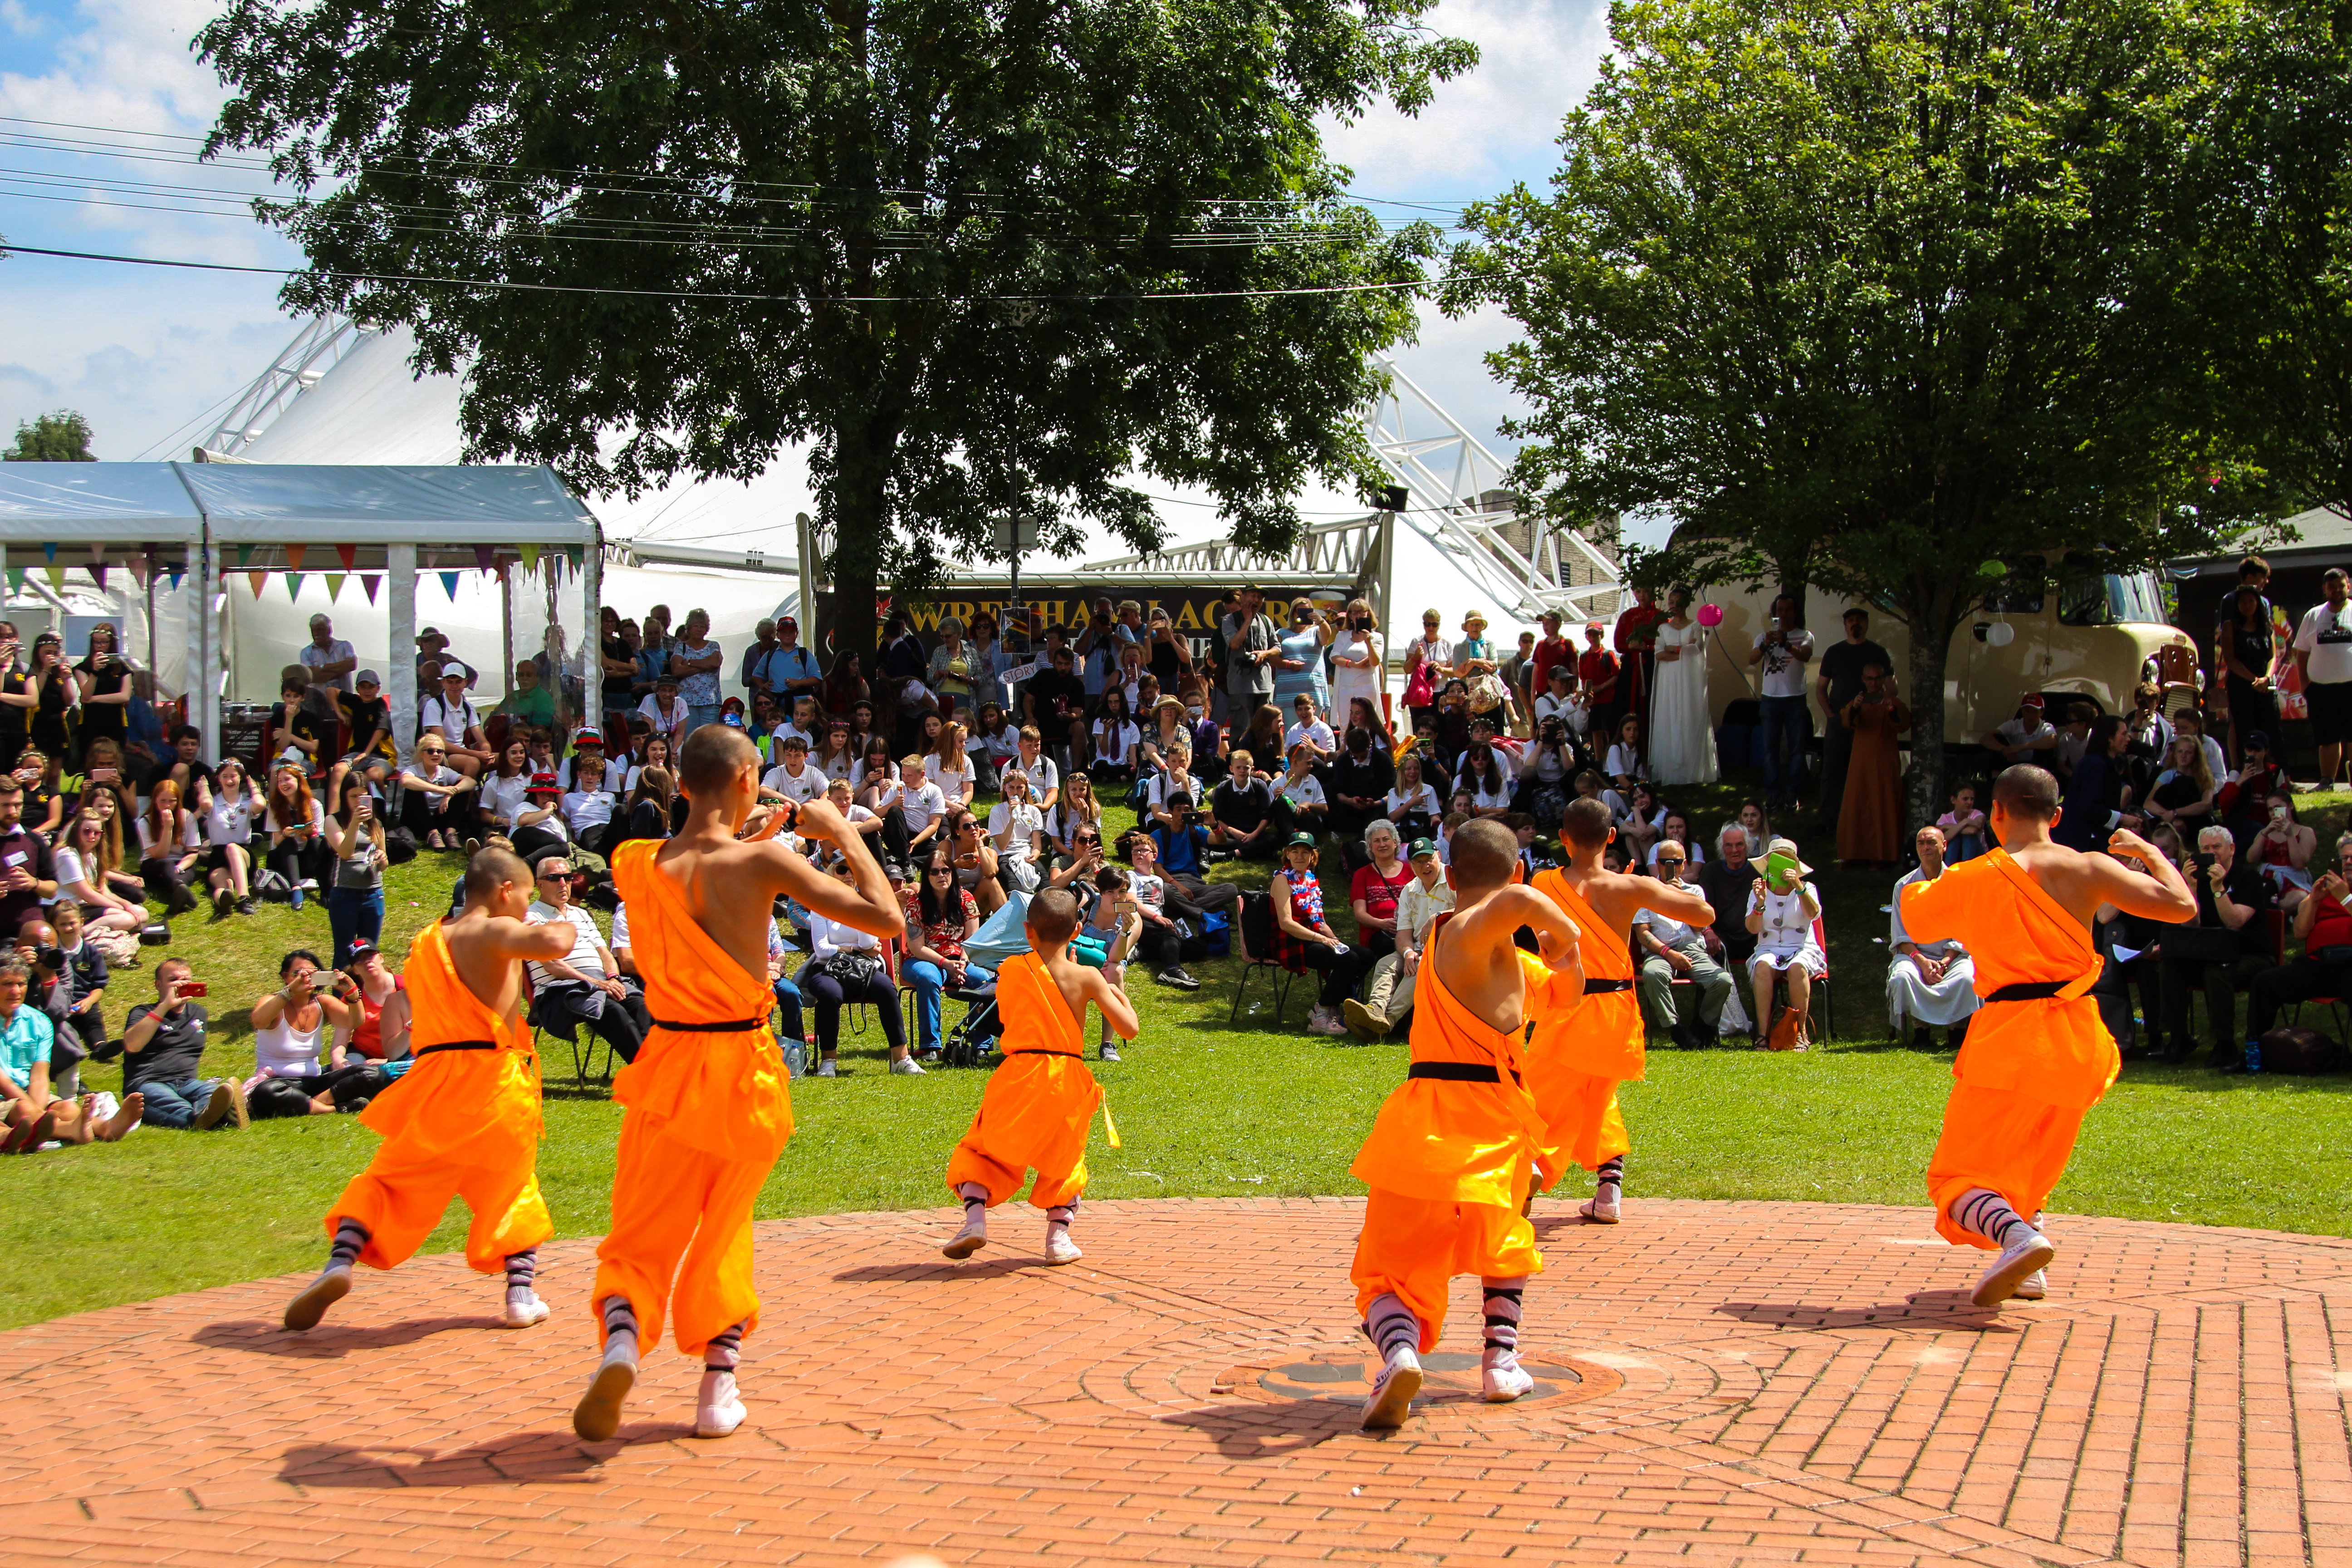 Six young dancers dressed in bright orange robes performing outdoors at Llangollen International Musical Eisteddfod